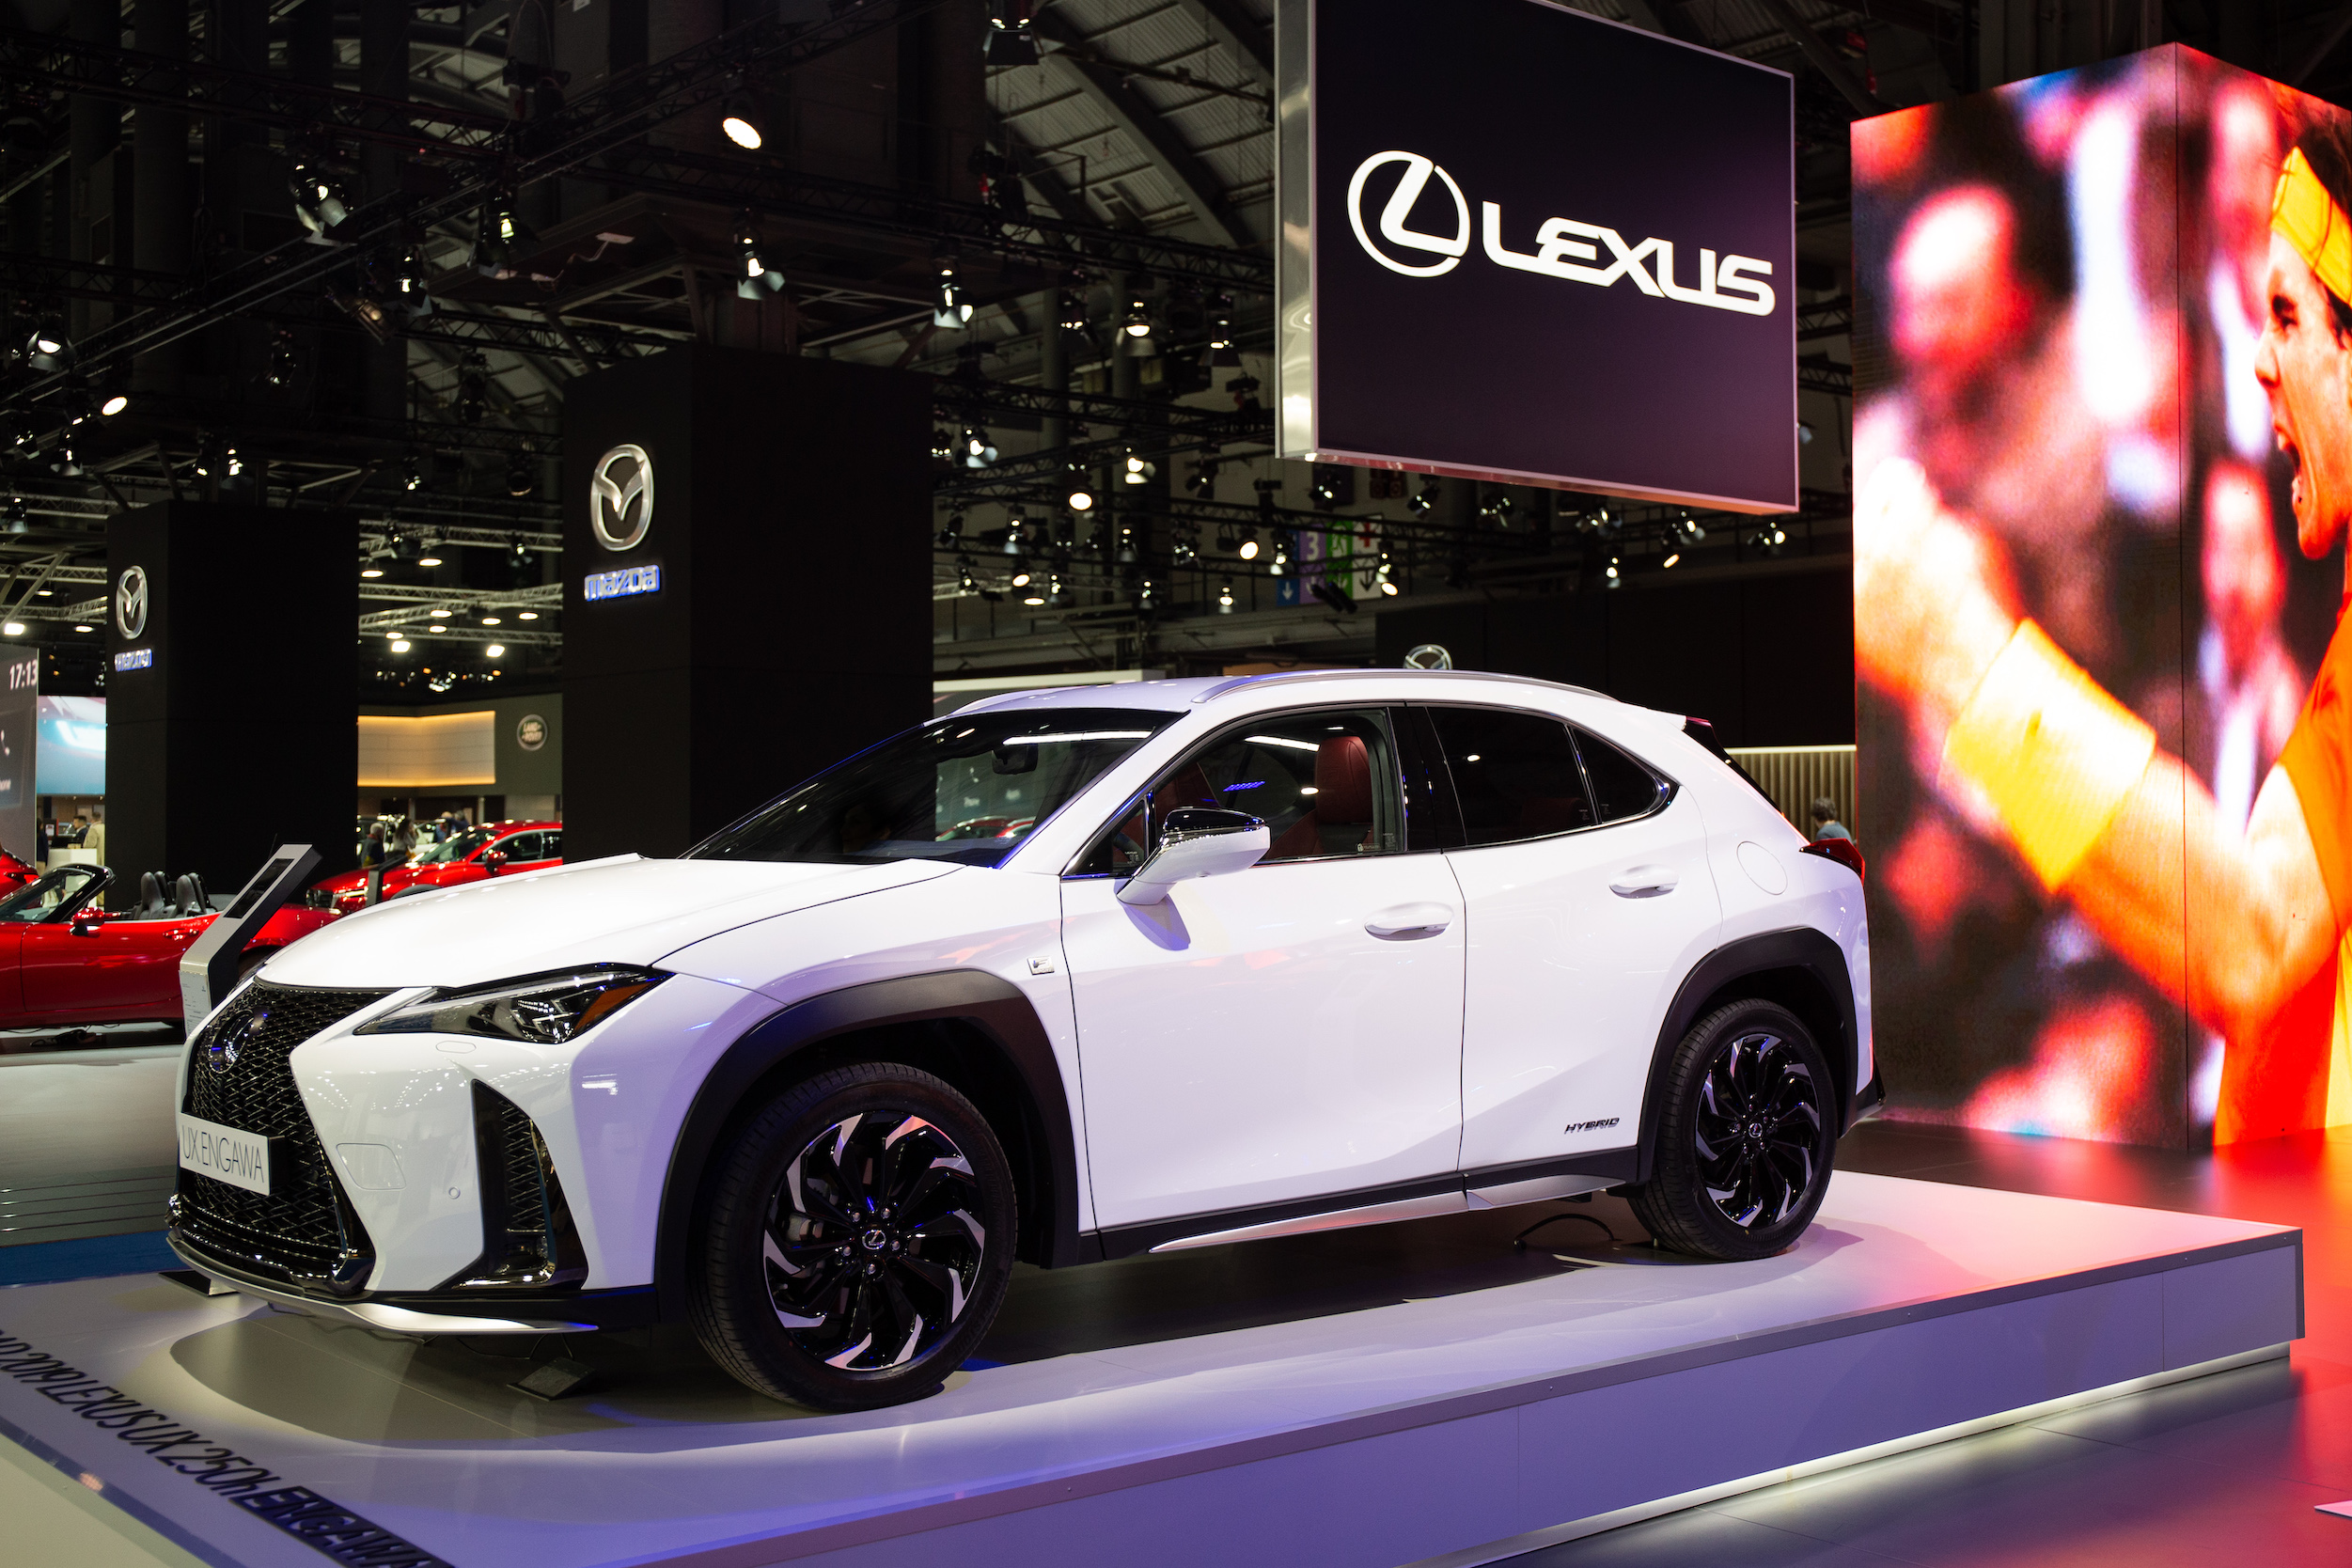 LEXUS UX 250 H. ENGAWA in exposition in the first day of the 'Salon del automovil 2019'